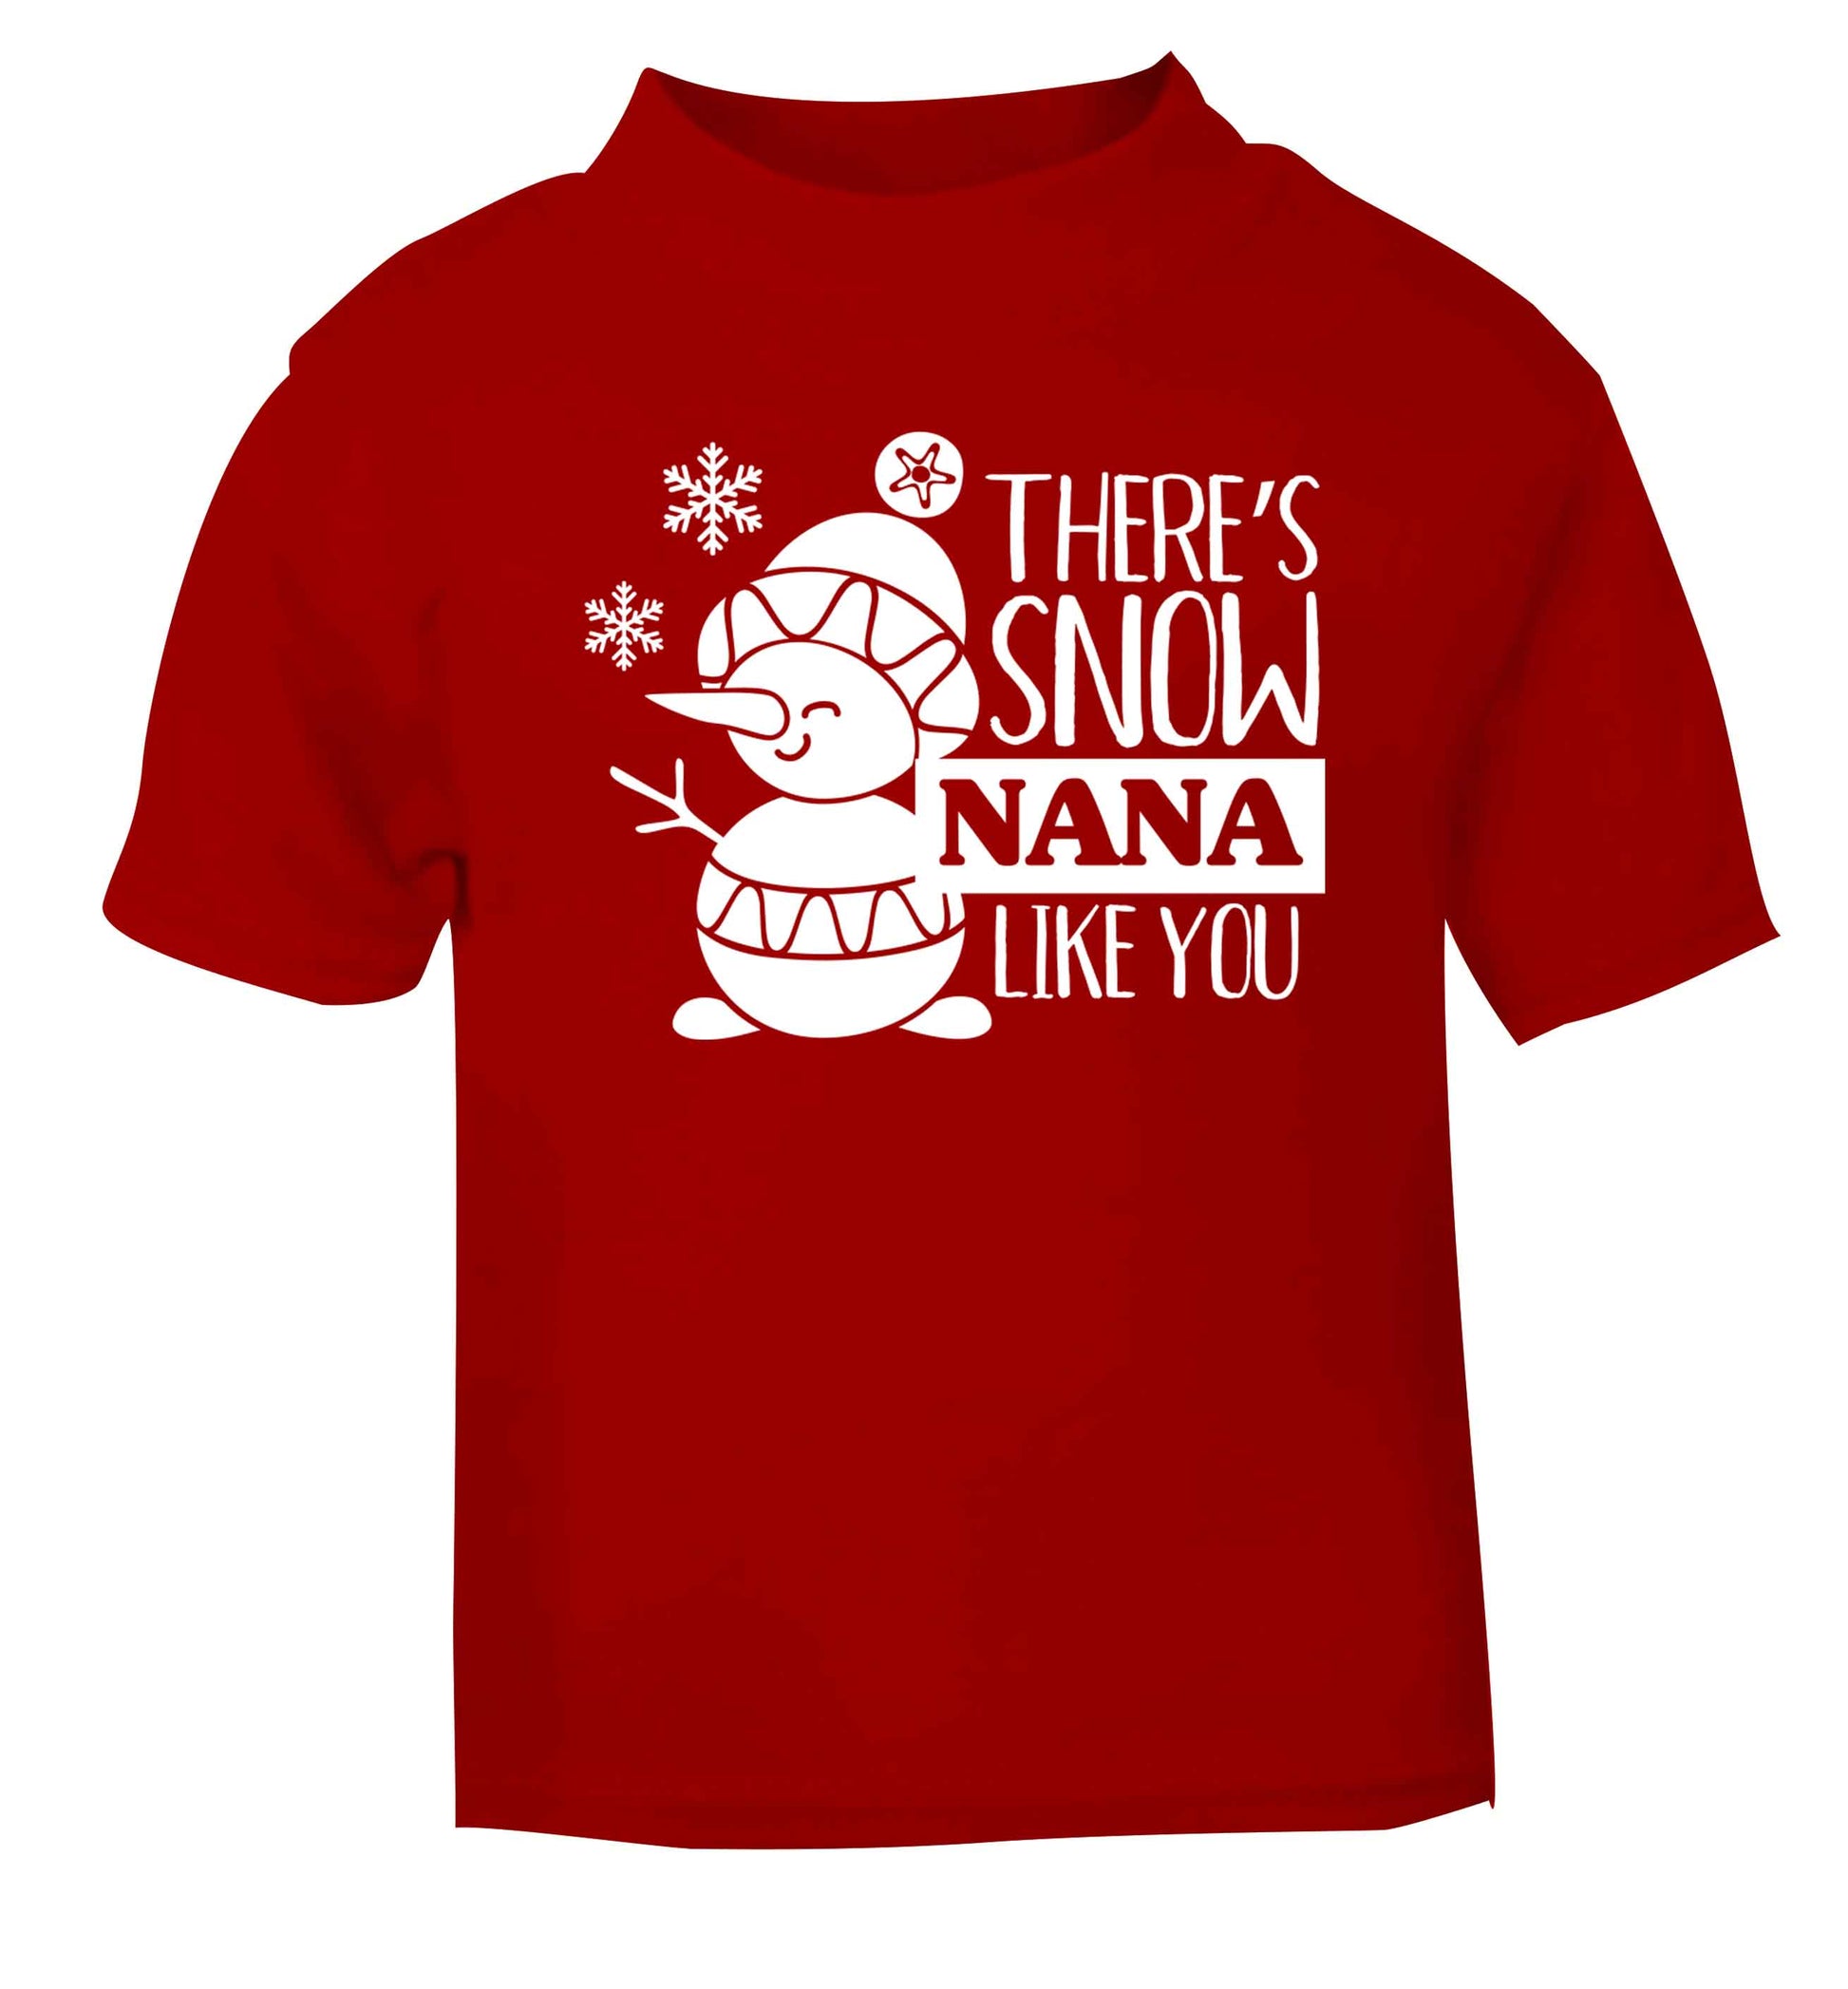 There's snow nana like you red baby toddler Tshirt 2 Years